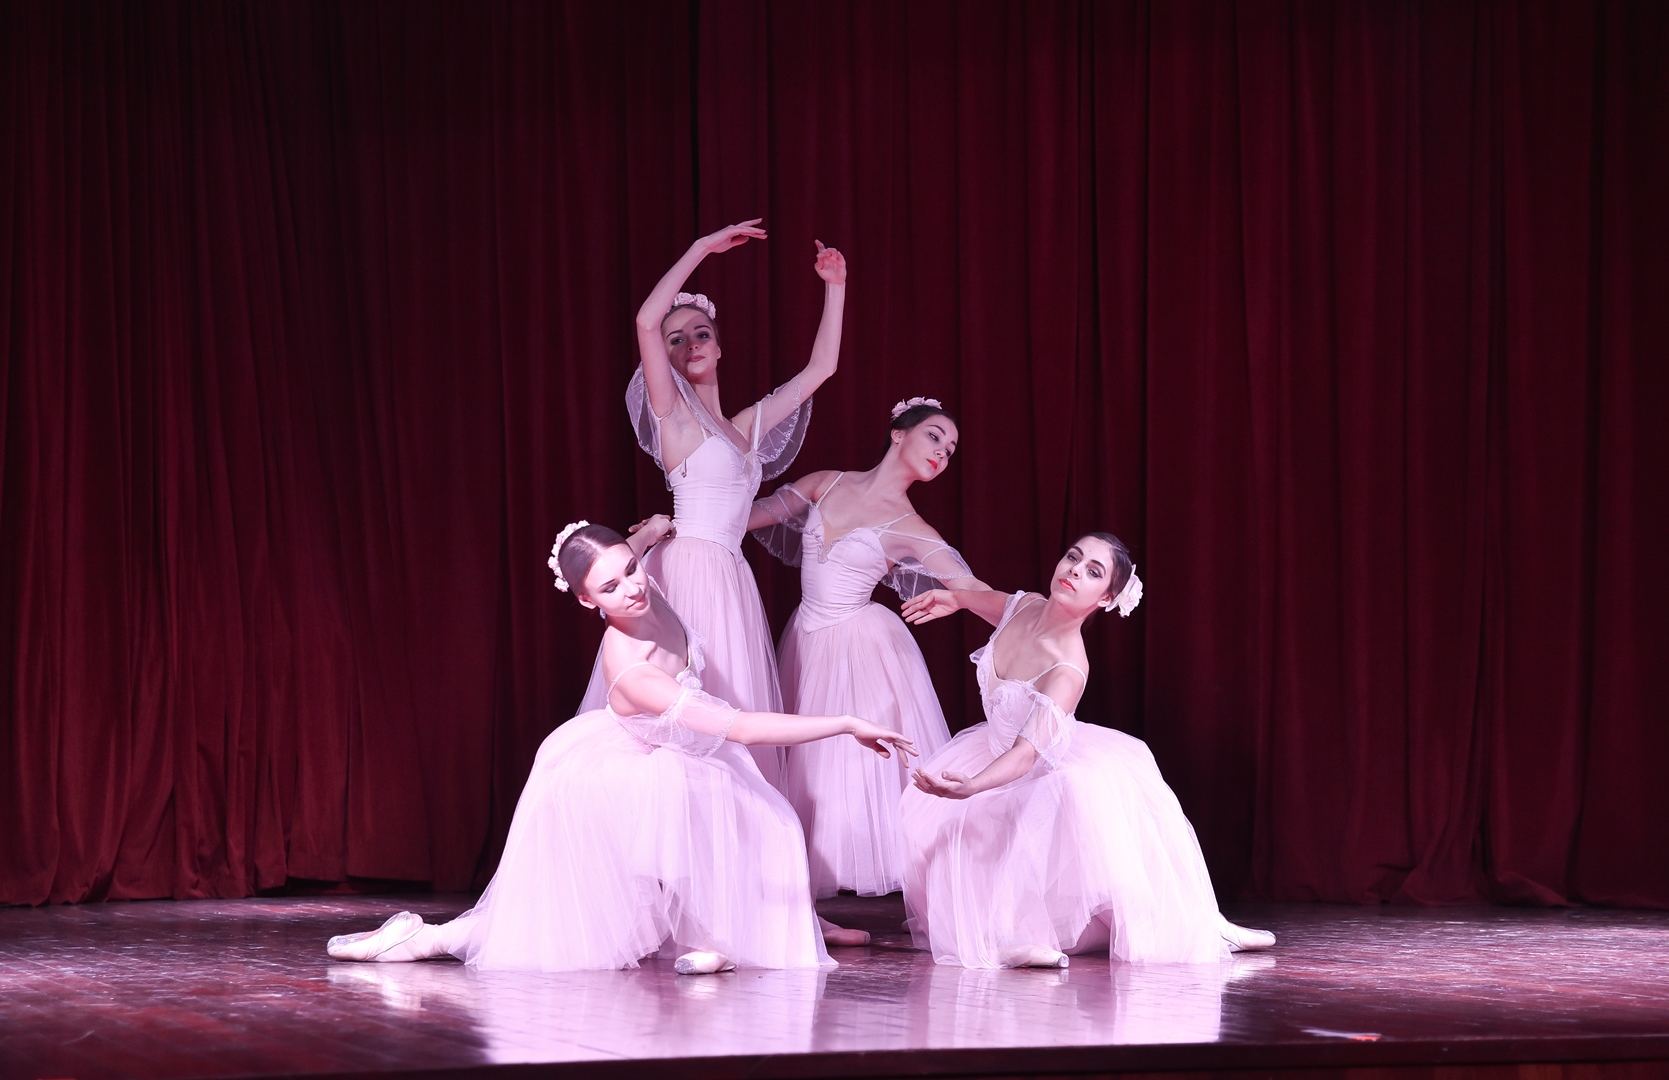 The ballet “Giselle” was performed in New Delhi.